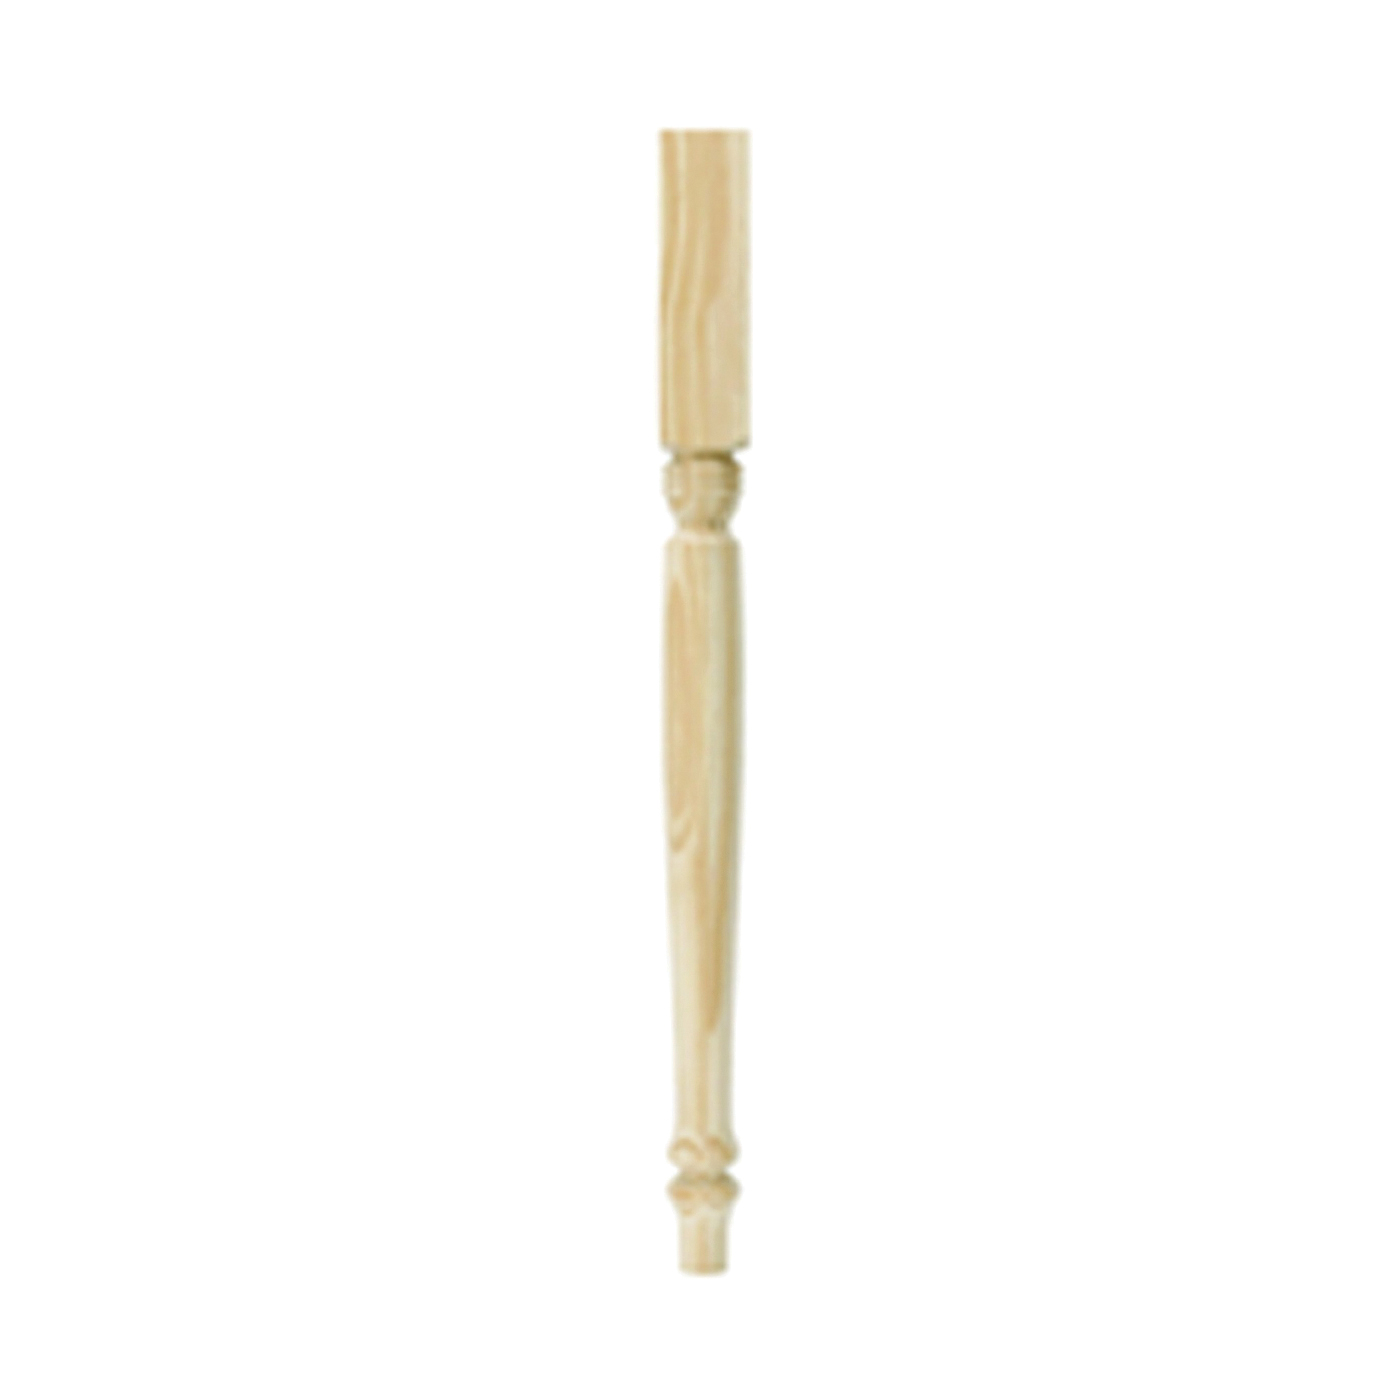 2921 Table Leg, 29 in H, 2-1/4 in W, Pine Wood, Beige, Smooth Sanded